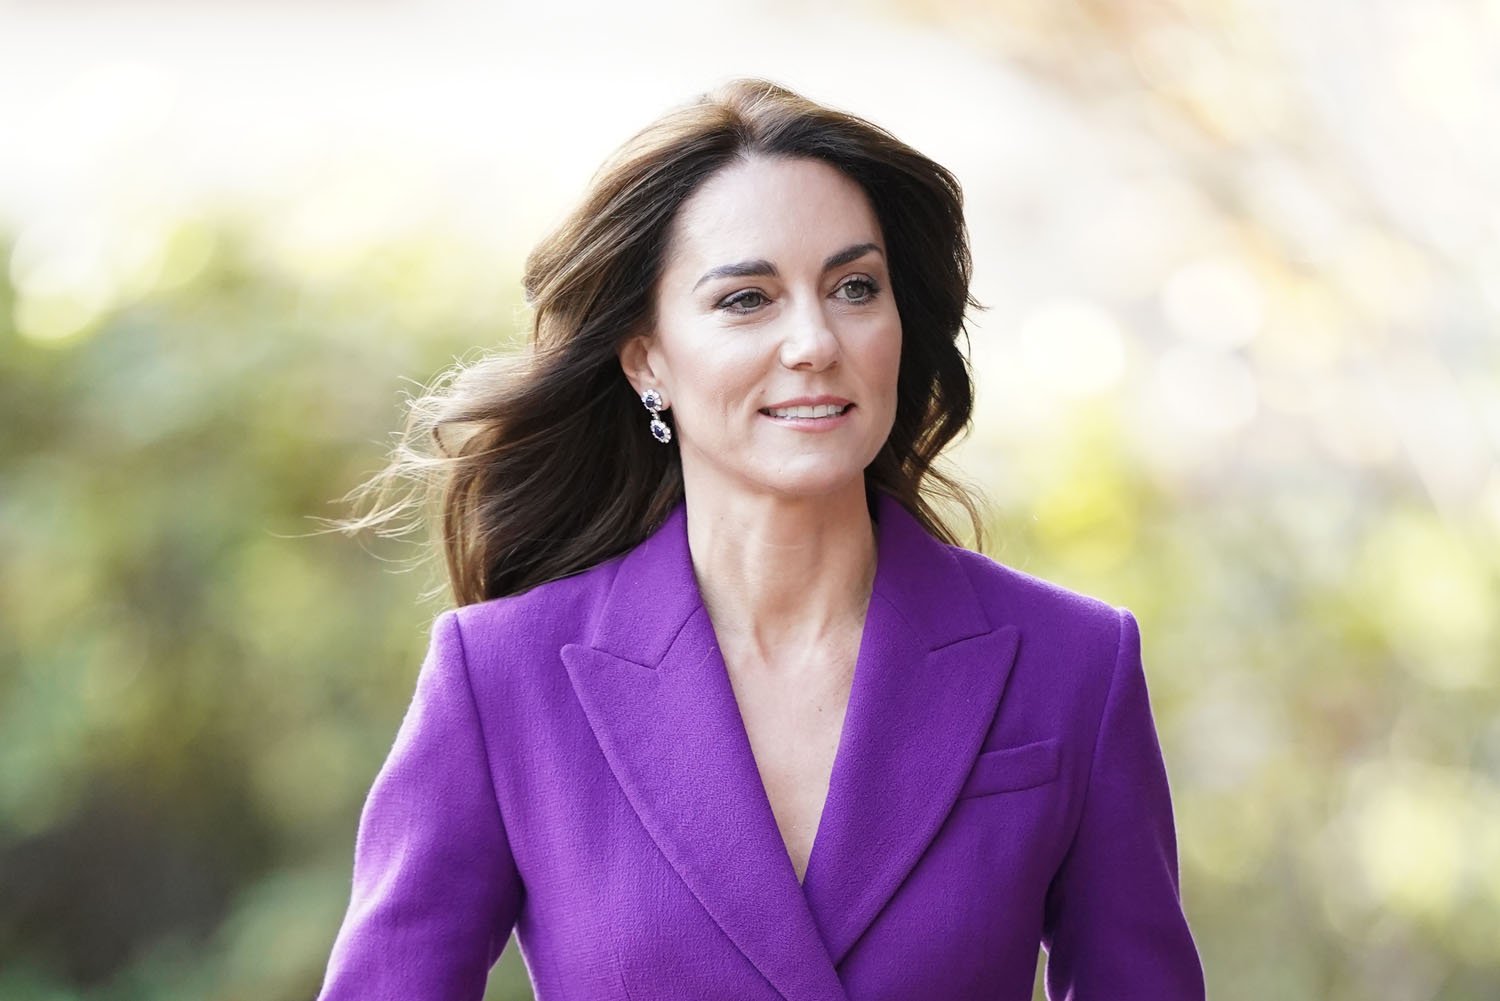 New photos of Princess Kate only reignite conversation about her health ...